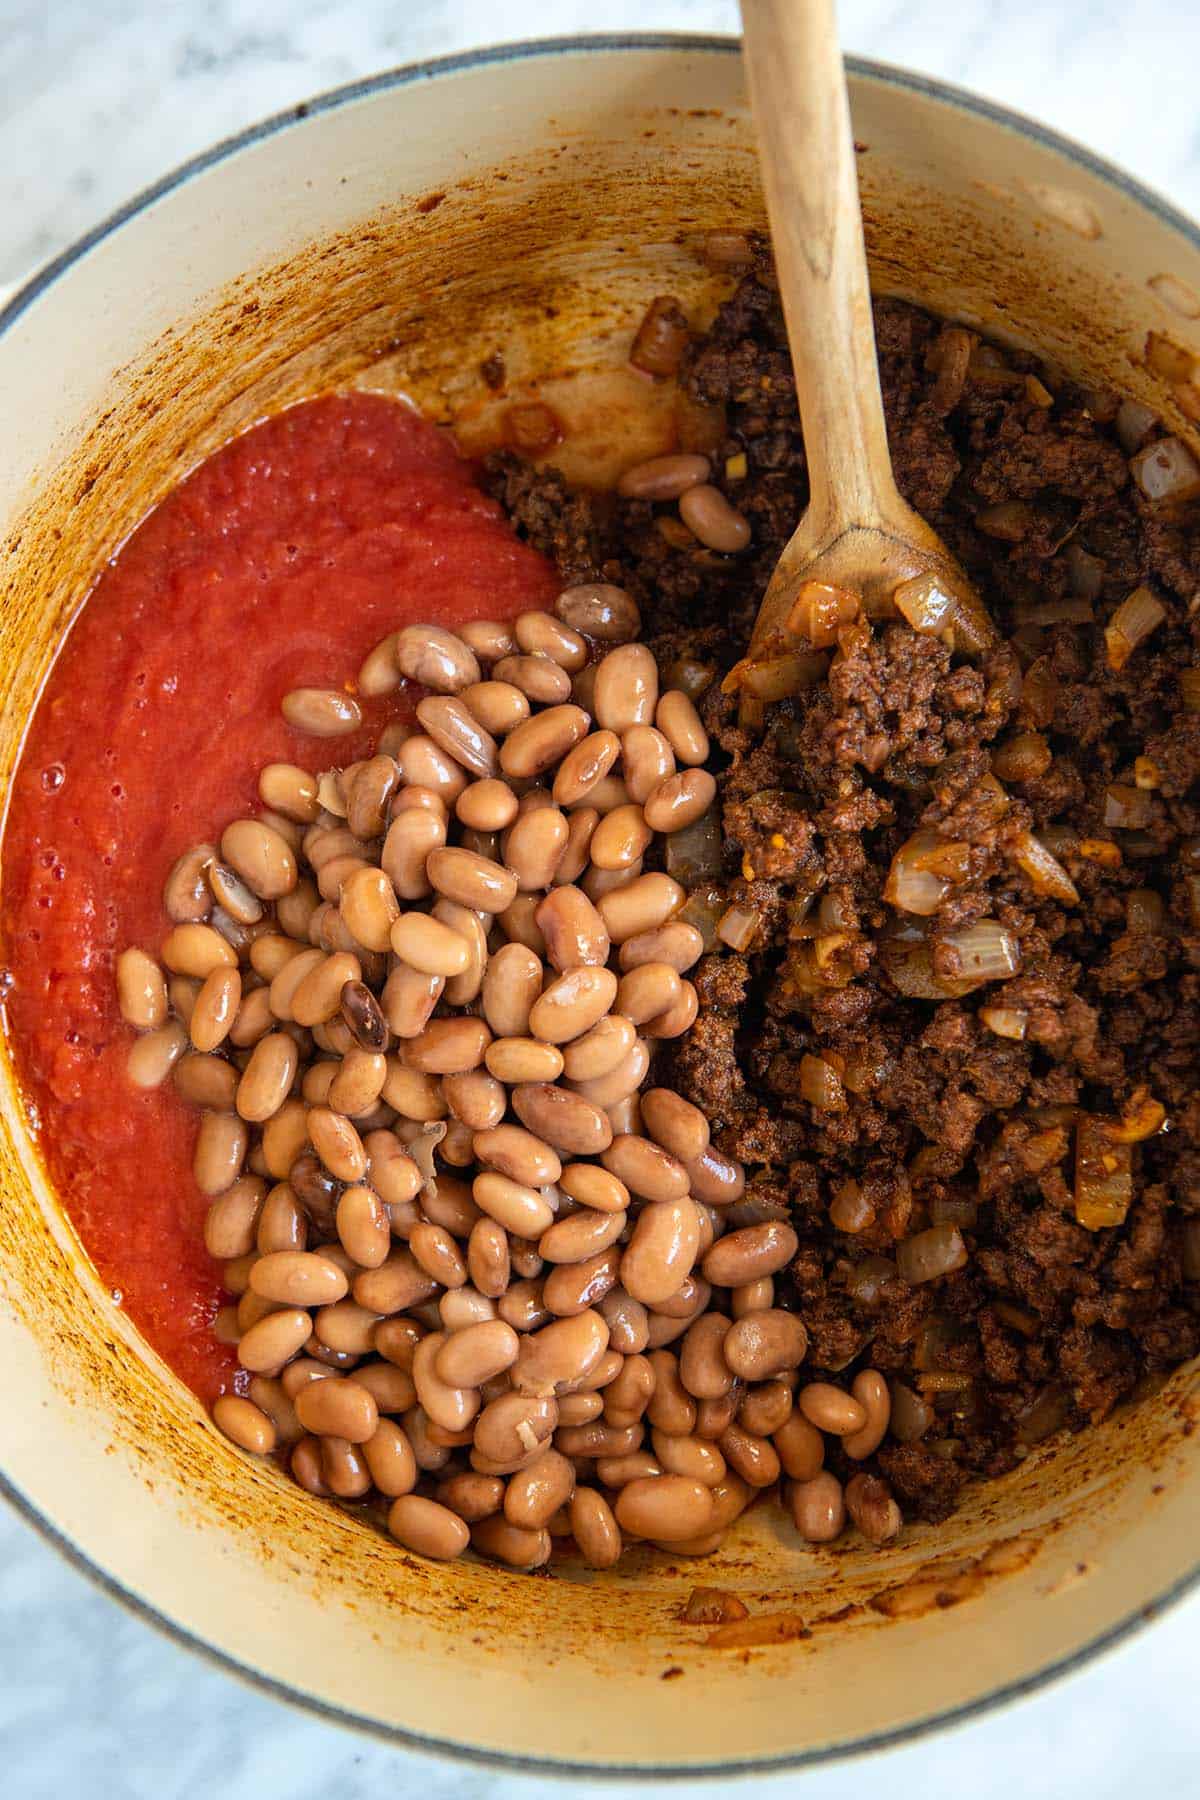 Adding tomatoes and beans to the chili